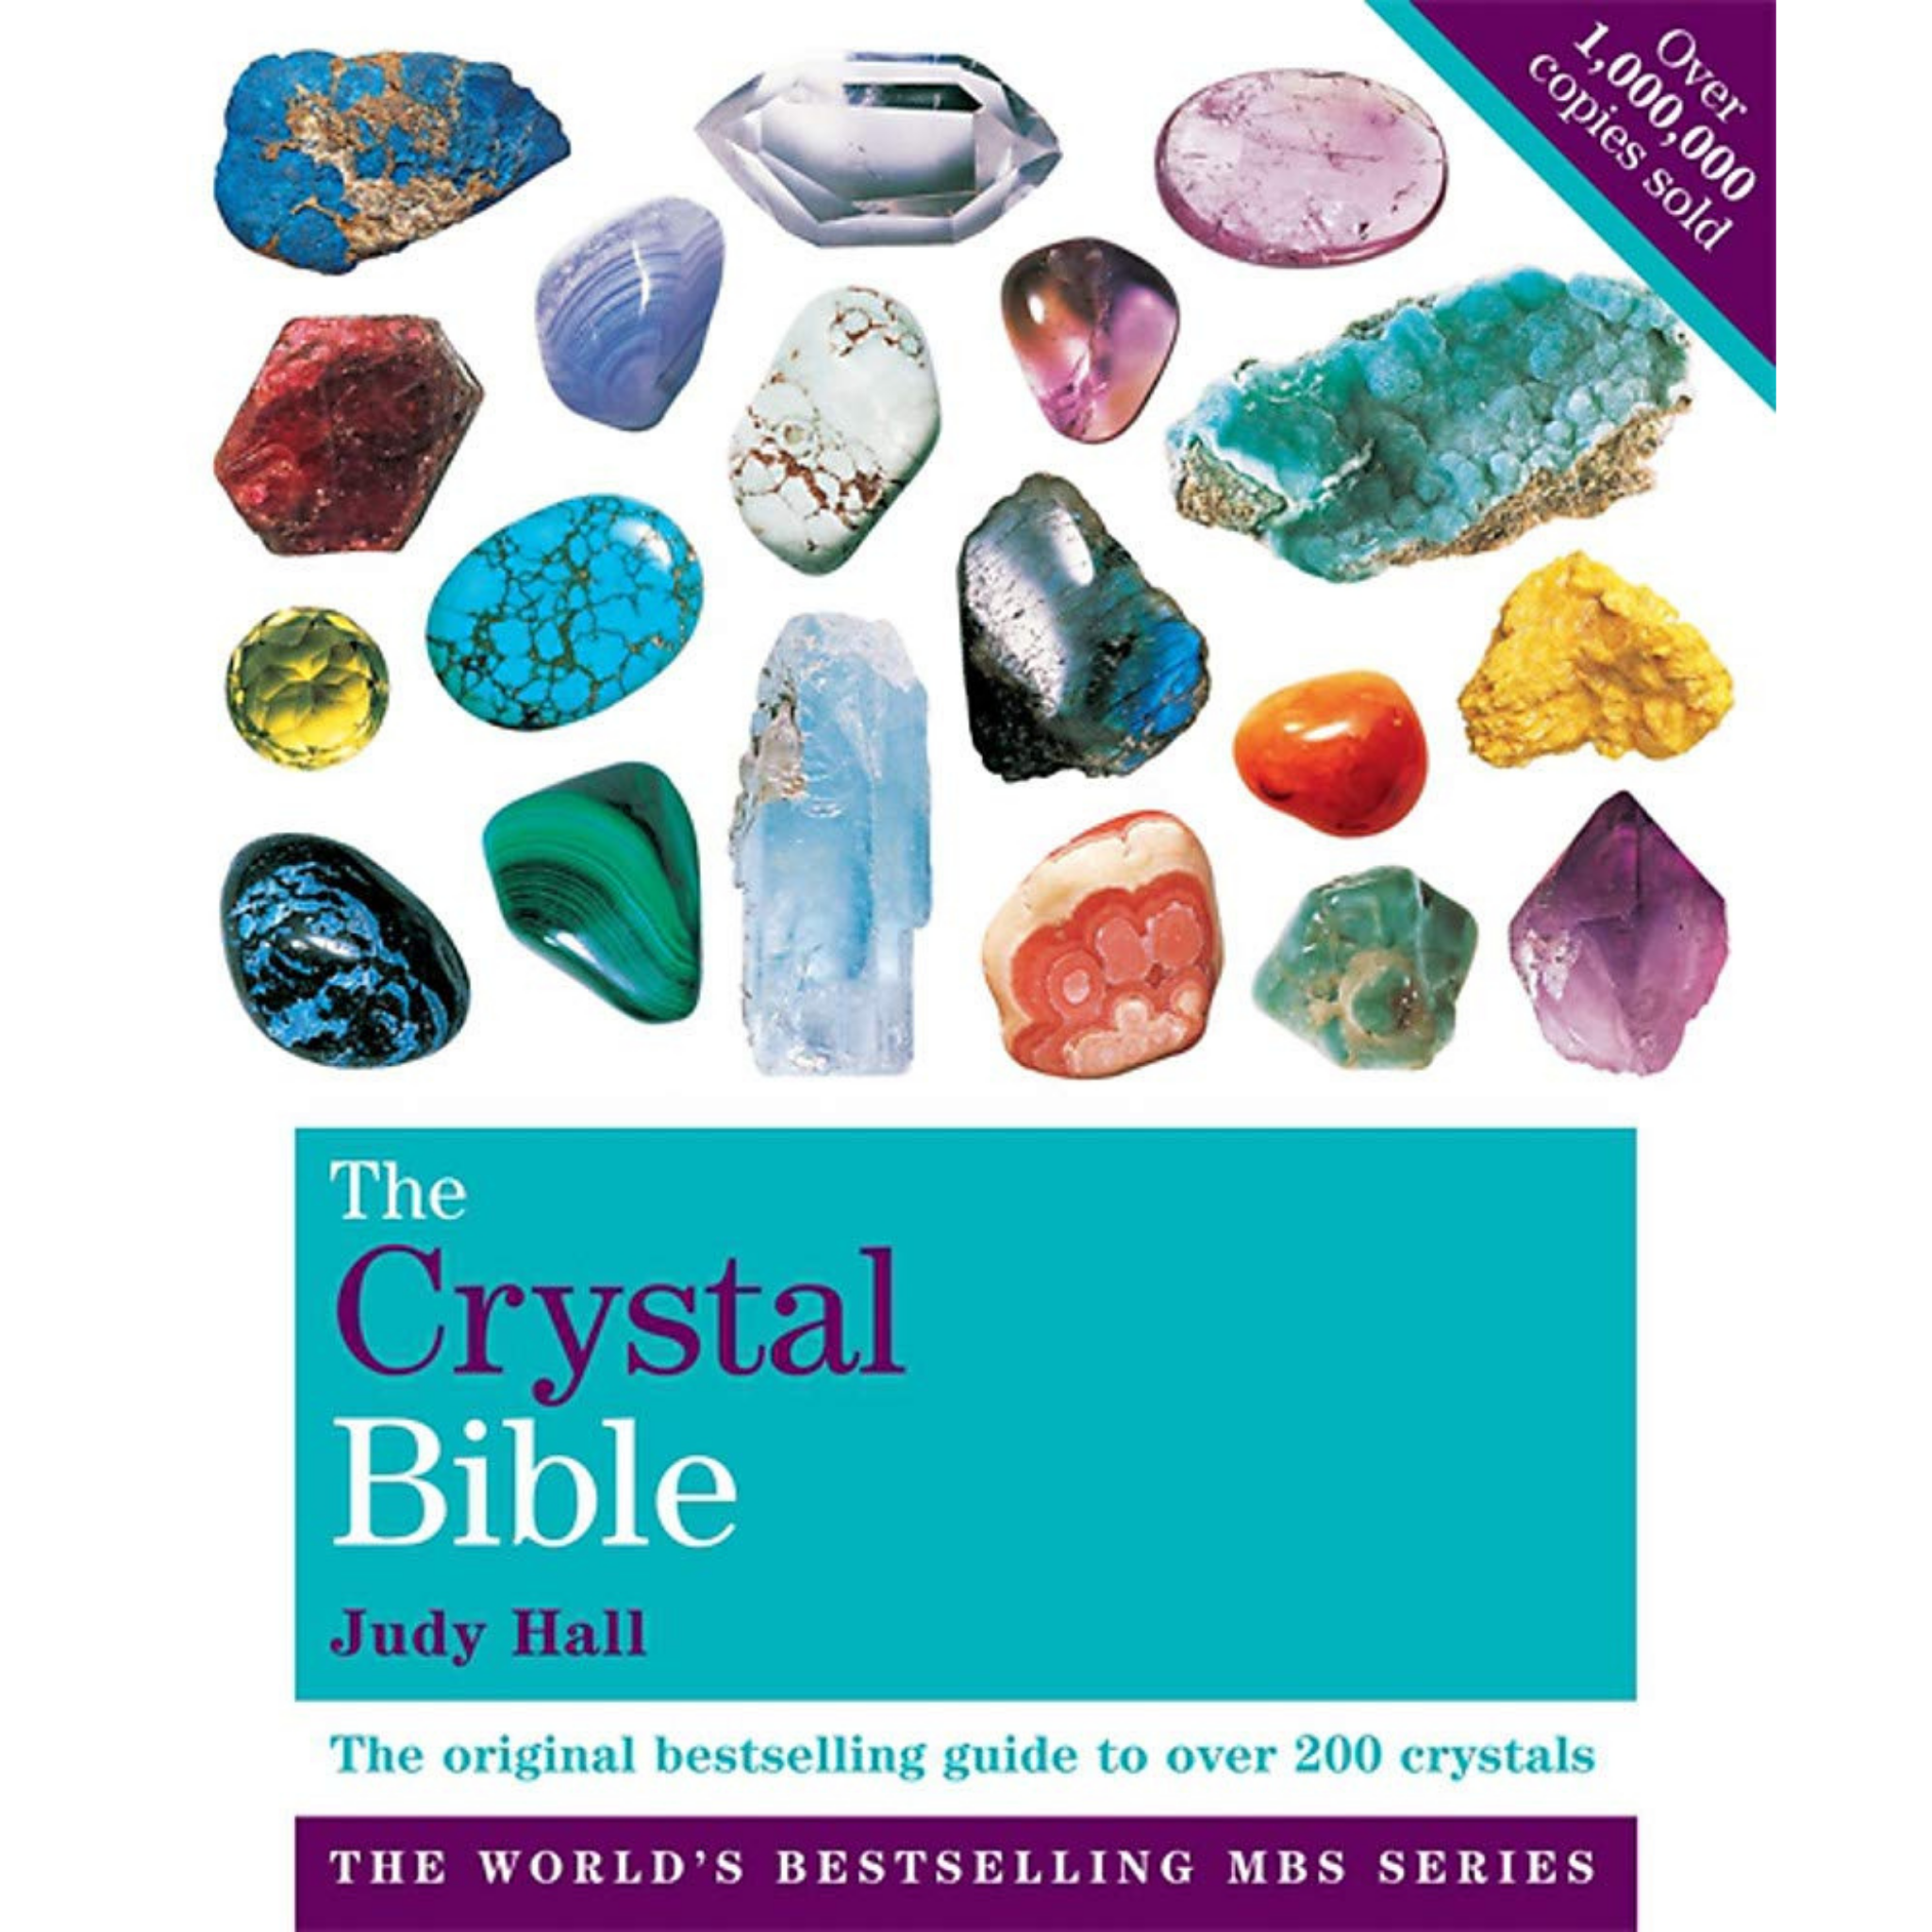 The Crystal Bible Book by Judy Hall